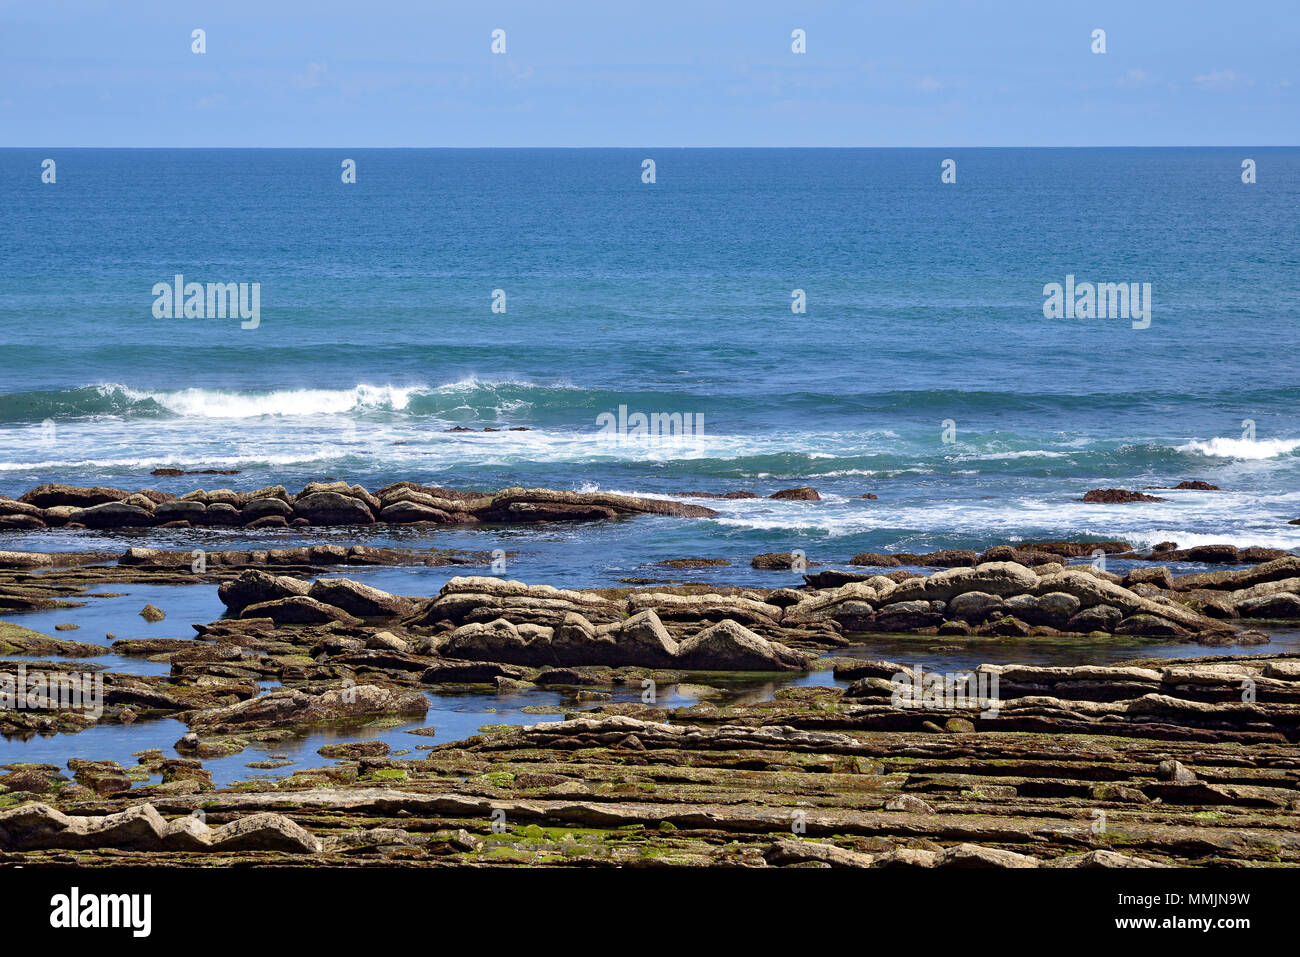 Rocky coastline of Socoa at Cibourre. Socoa that is a district of Cibourre and of Urrugne in the Pyrénées-Atlantiques department in south-western Fran Stock Photo